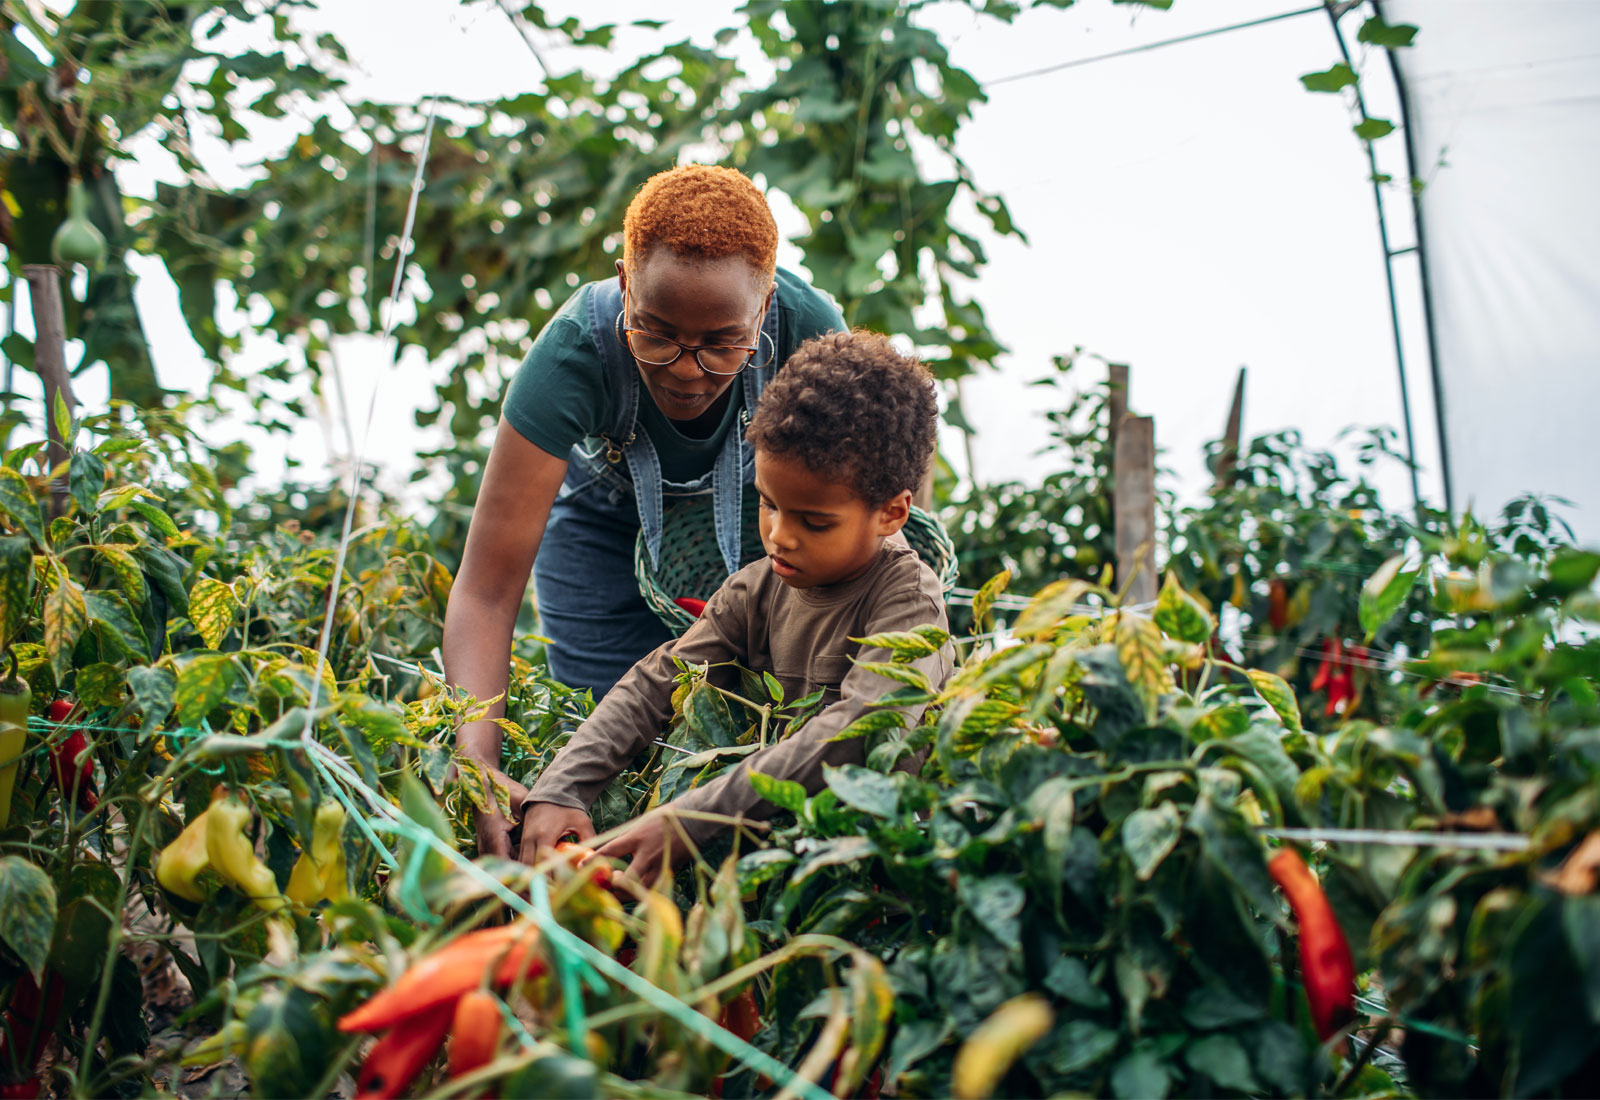 A woman and young boy harvesting peppers in a garden